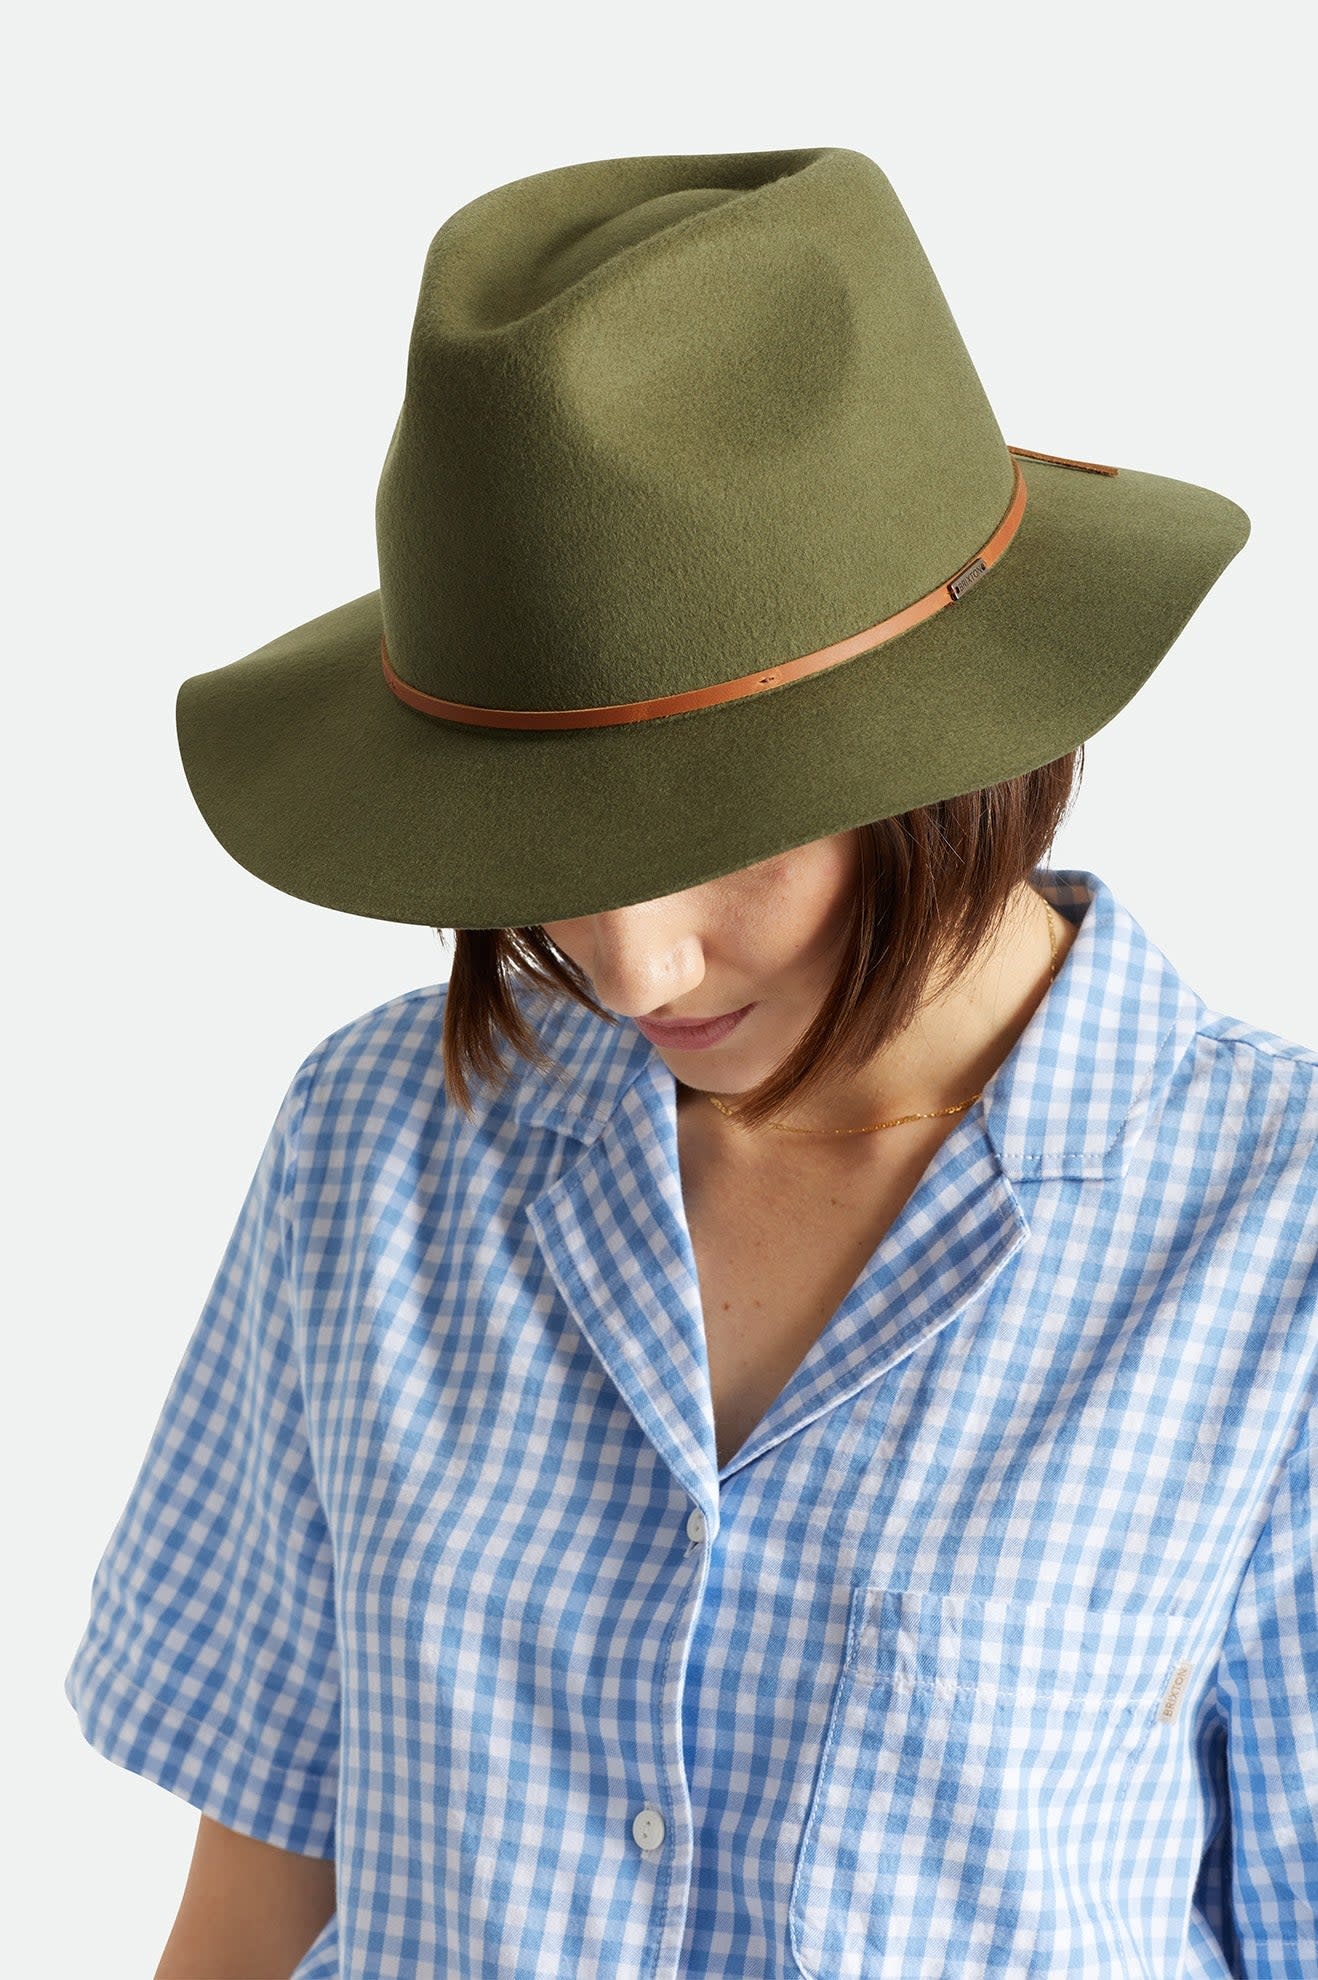 Wesley Packable Fedora - Military Olive